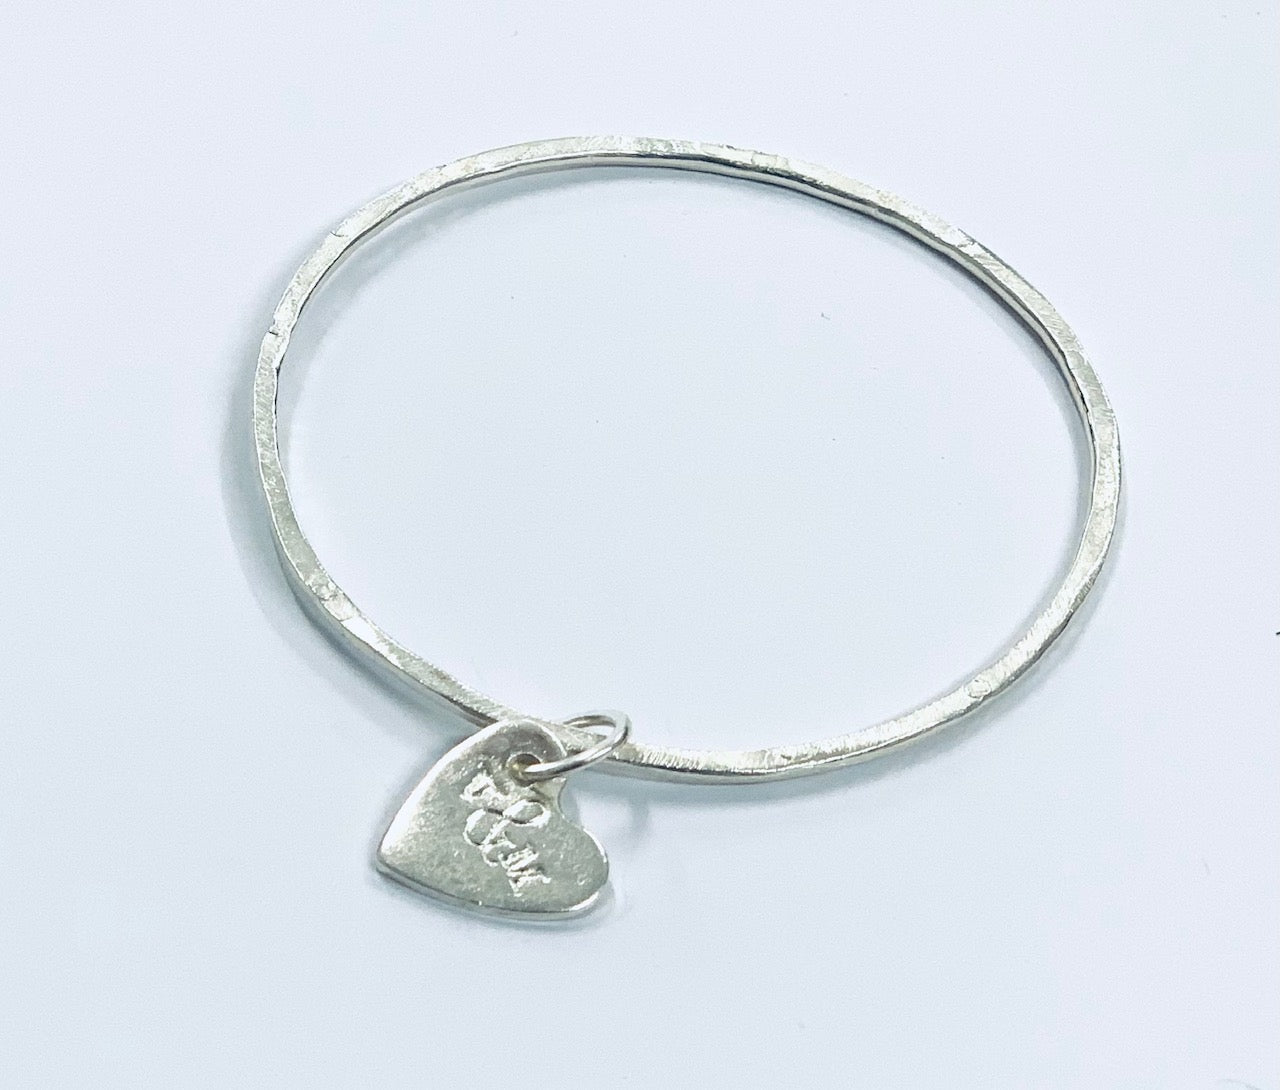 Thin silver bangle with heart